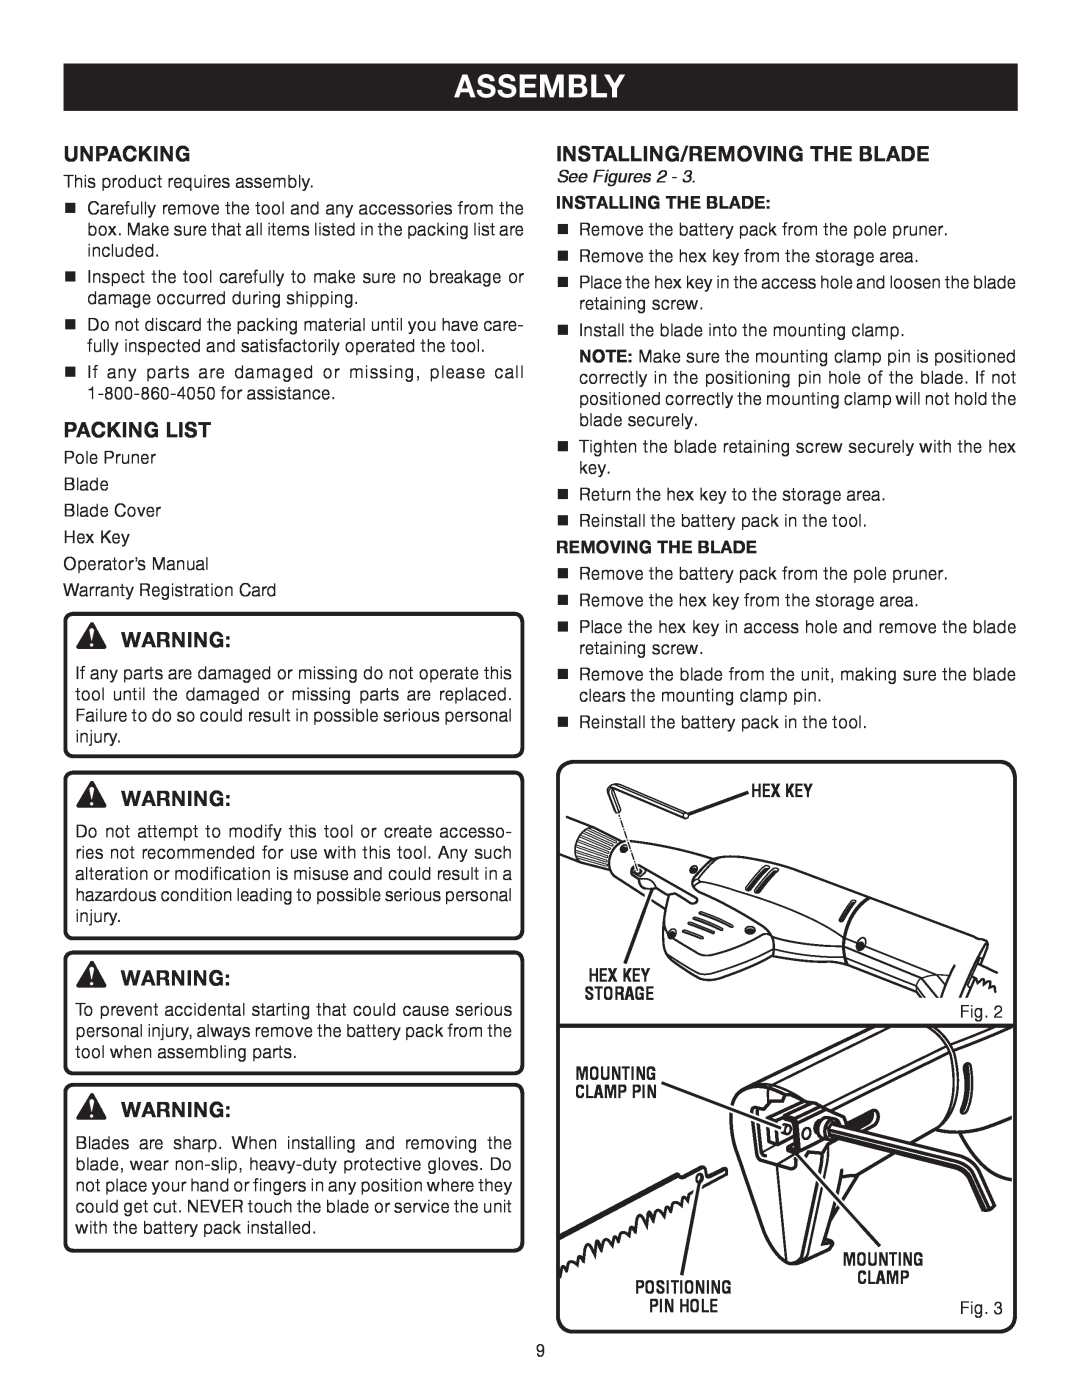 Ryobi P2500 manual Assembly, Unpacking, Packing List, Installing/Removing The Blade, See Figures 